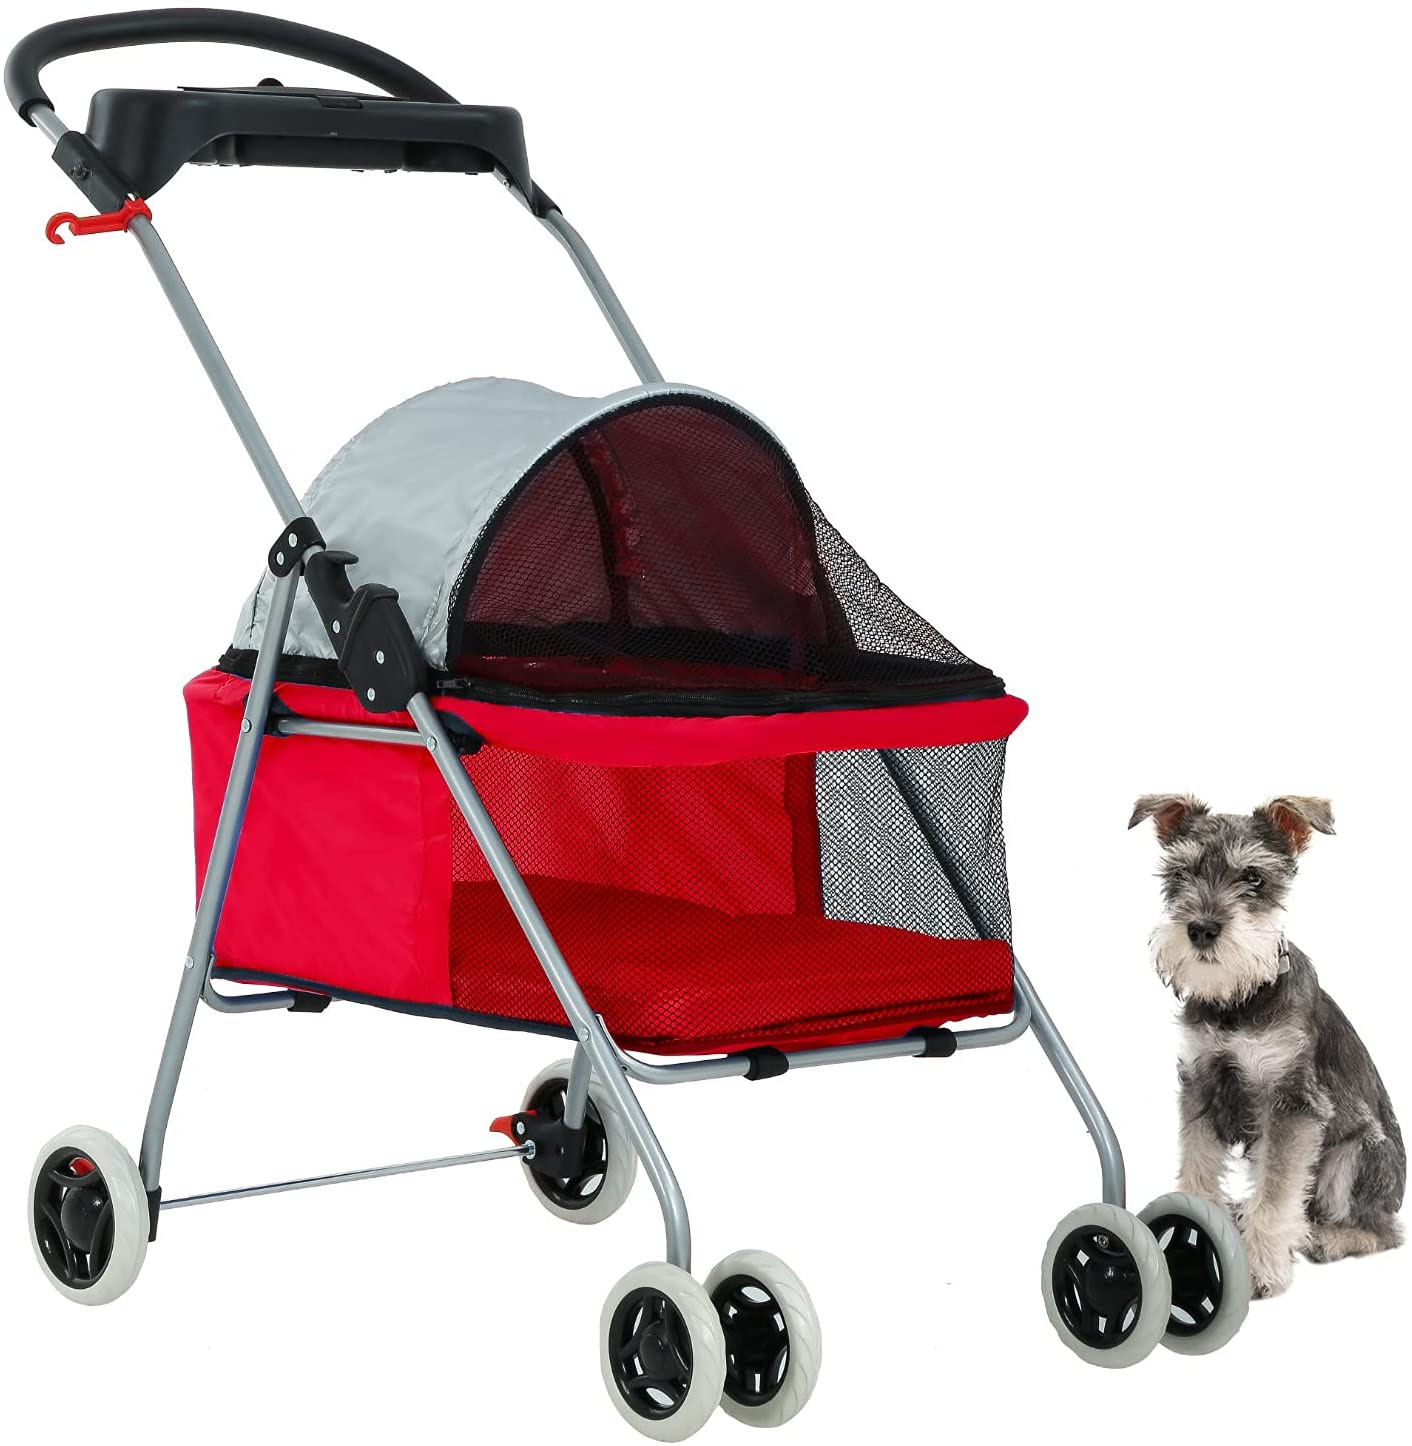 Image of Pet Stroller 4 Wheels Posh Folding Waterproof Portable Travel Cat Dog Stroller with Cup Holder